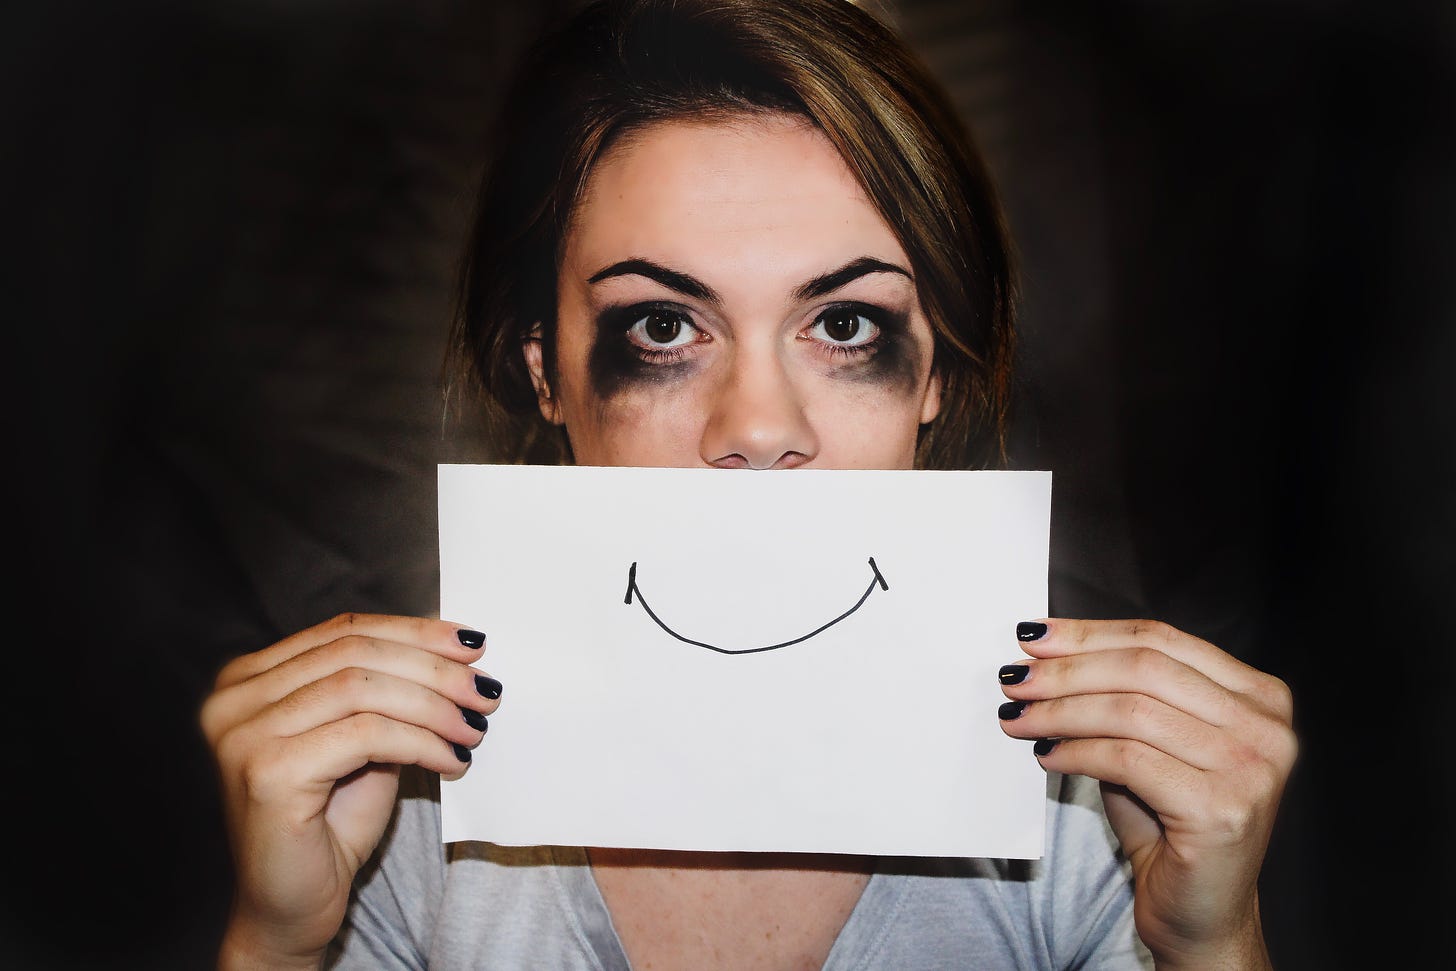 Photo of a woman with black eye makeup holding up a paper with a smiling face over her mouth. Sydney Sims / Unsplash